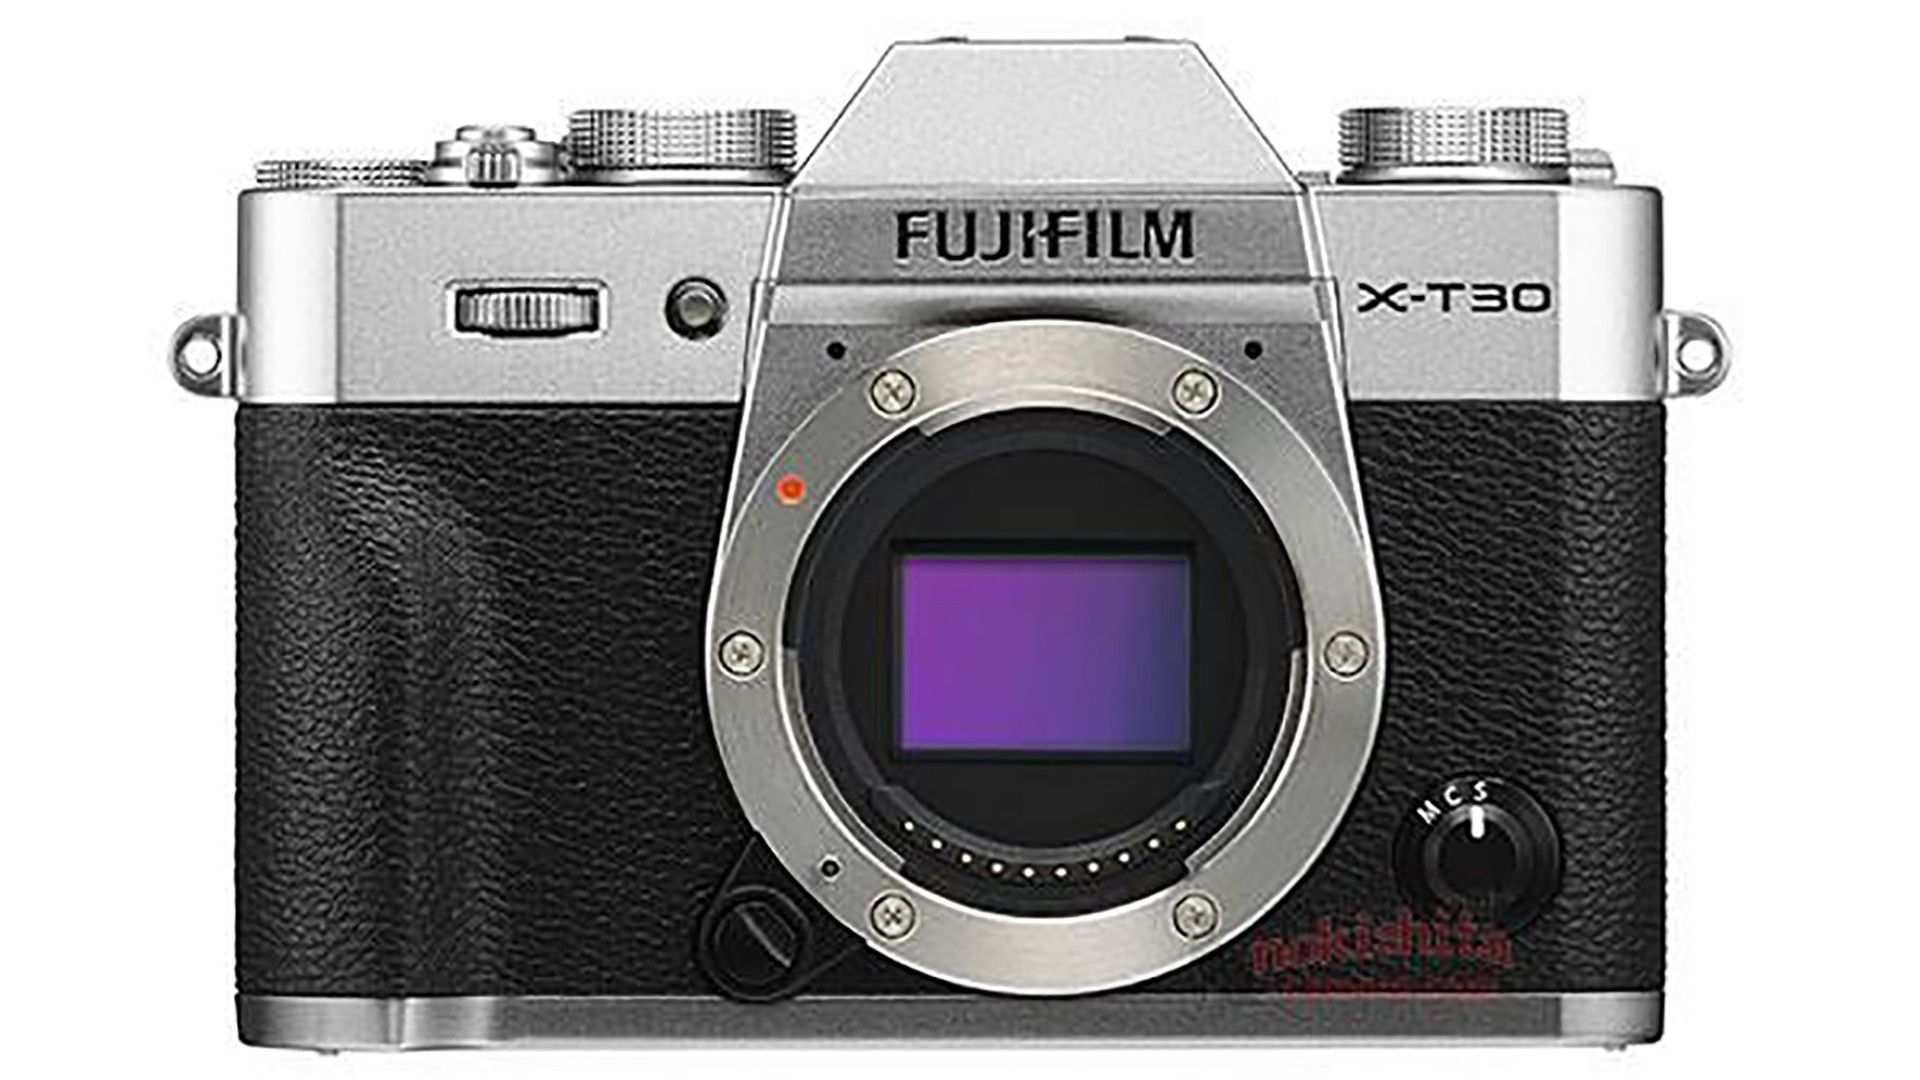 First Look at New Fujifilm X-T30 Features New Joystick Control